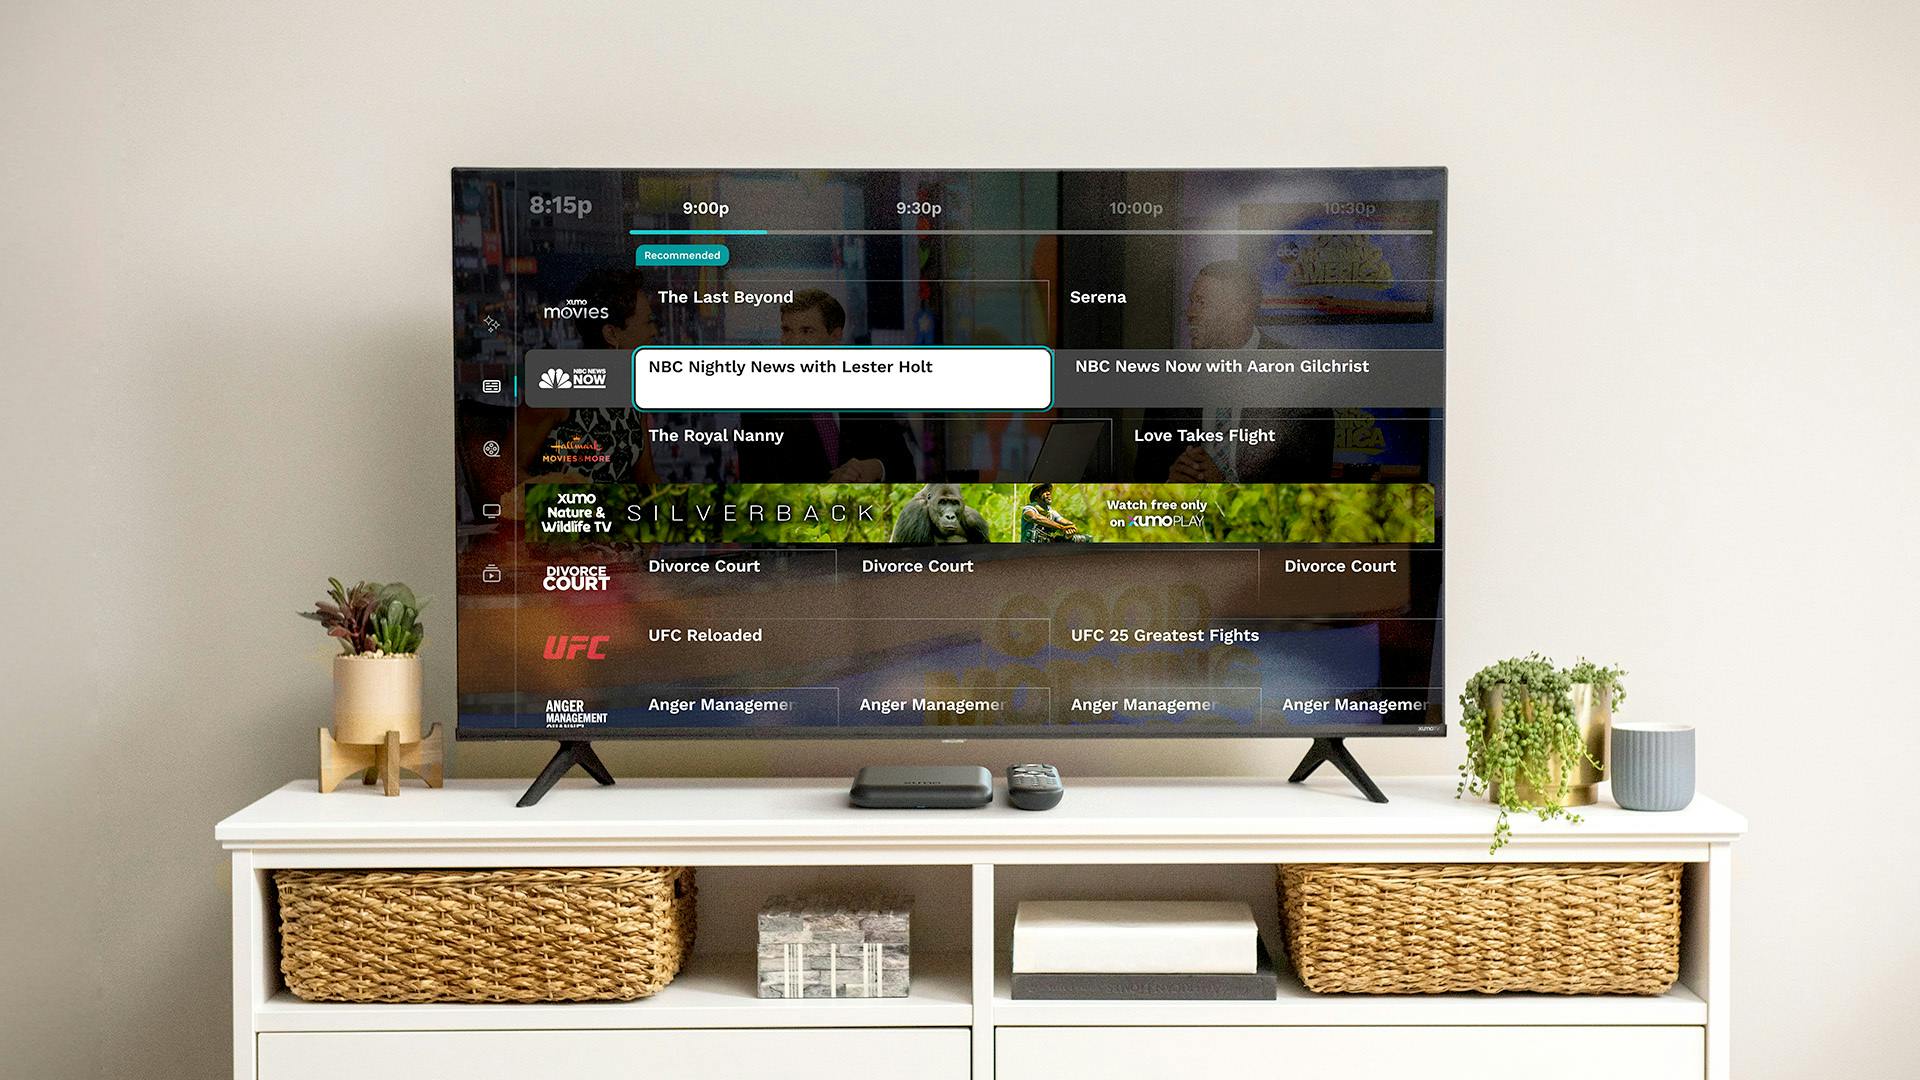 An image of a TV using Xumo Play's TV guide feature.